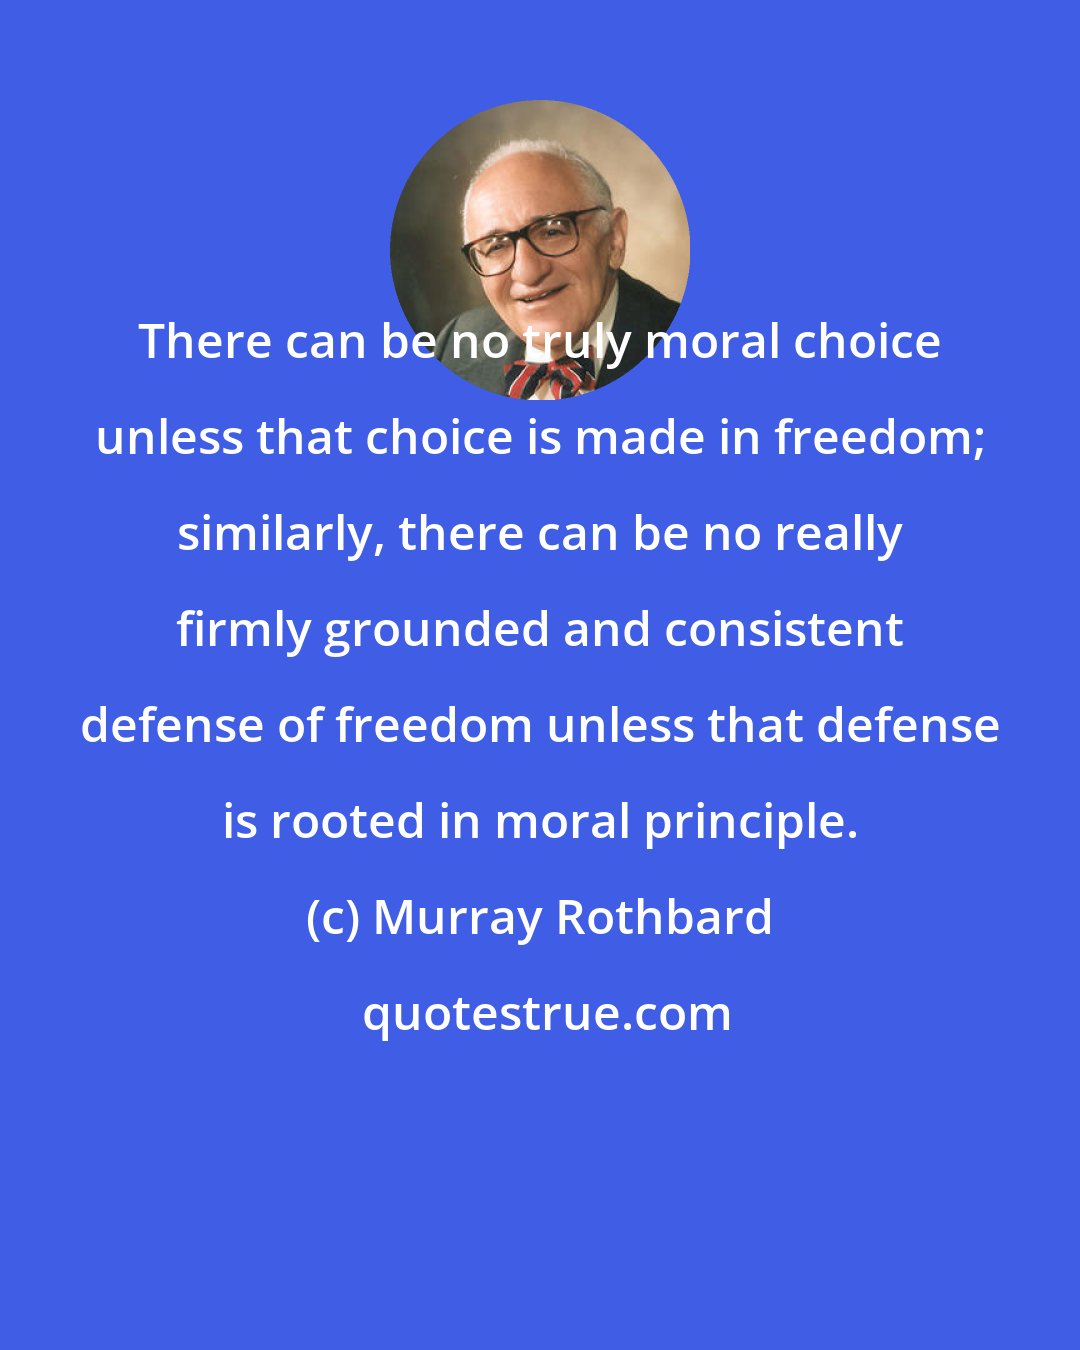 Murray Rothbard: There can be no truly moral choice unless that choice is made in freedom; similarly, there can be no really firmly grounded and consistent defense of freedom unless that defense is rooted in moral principle.